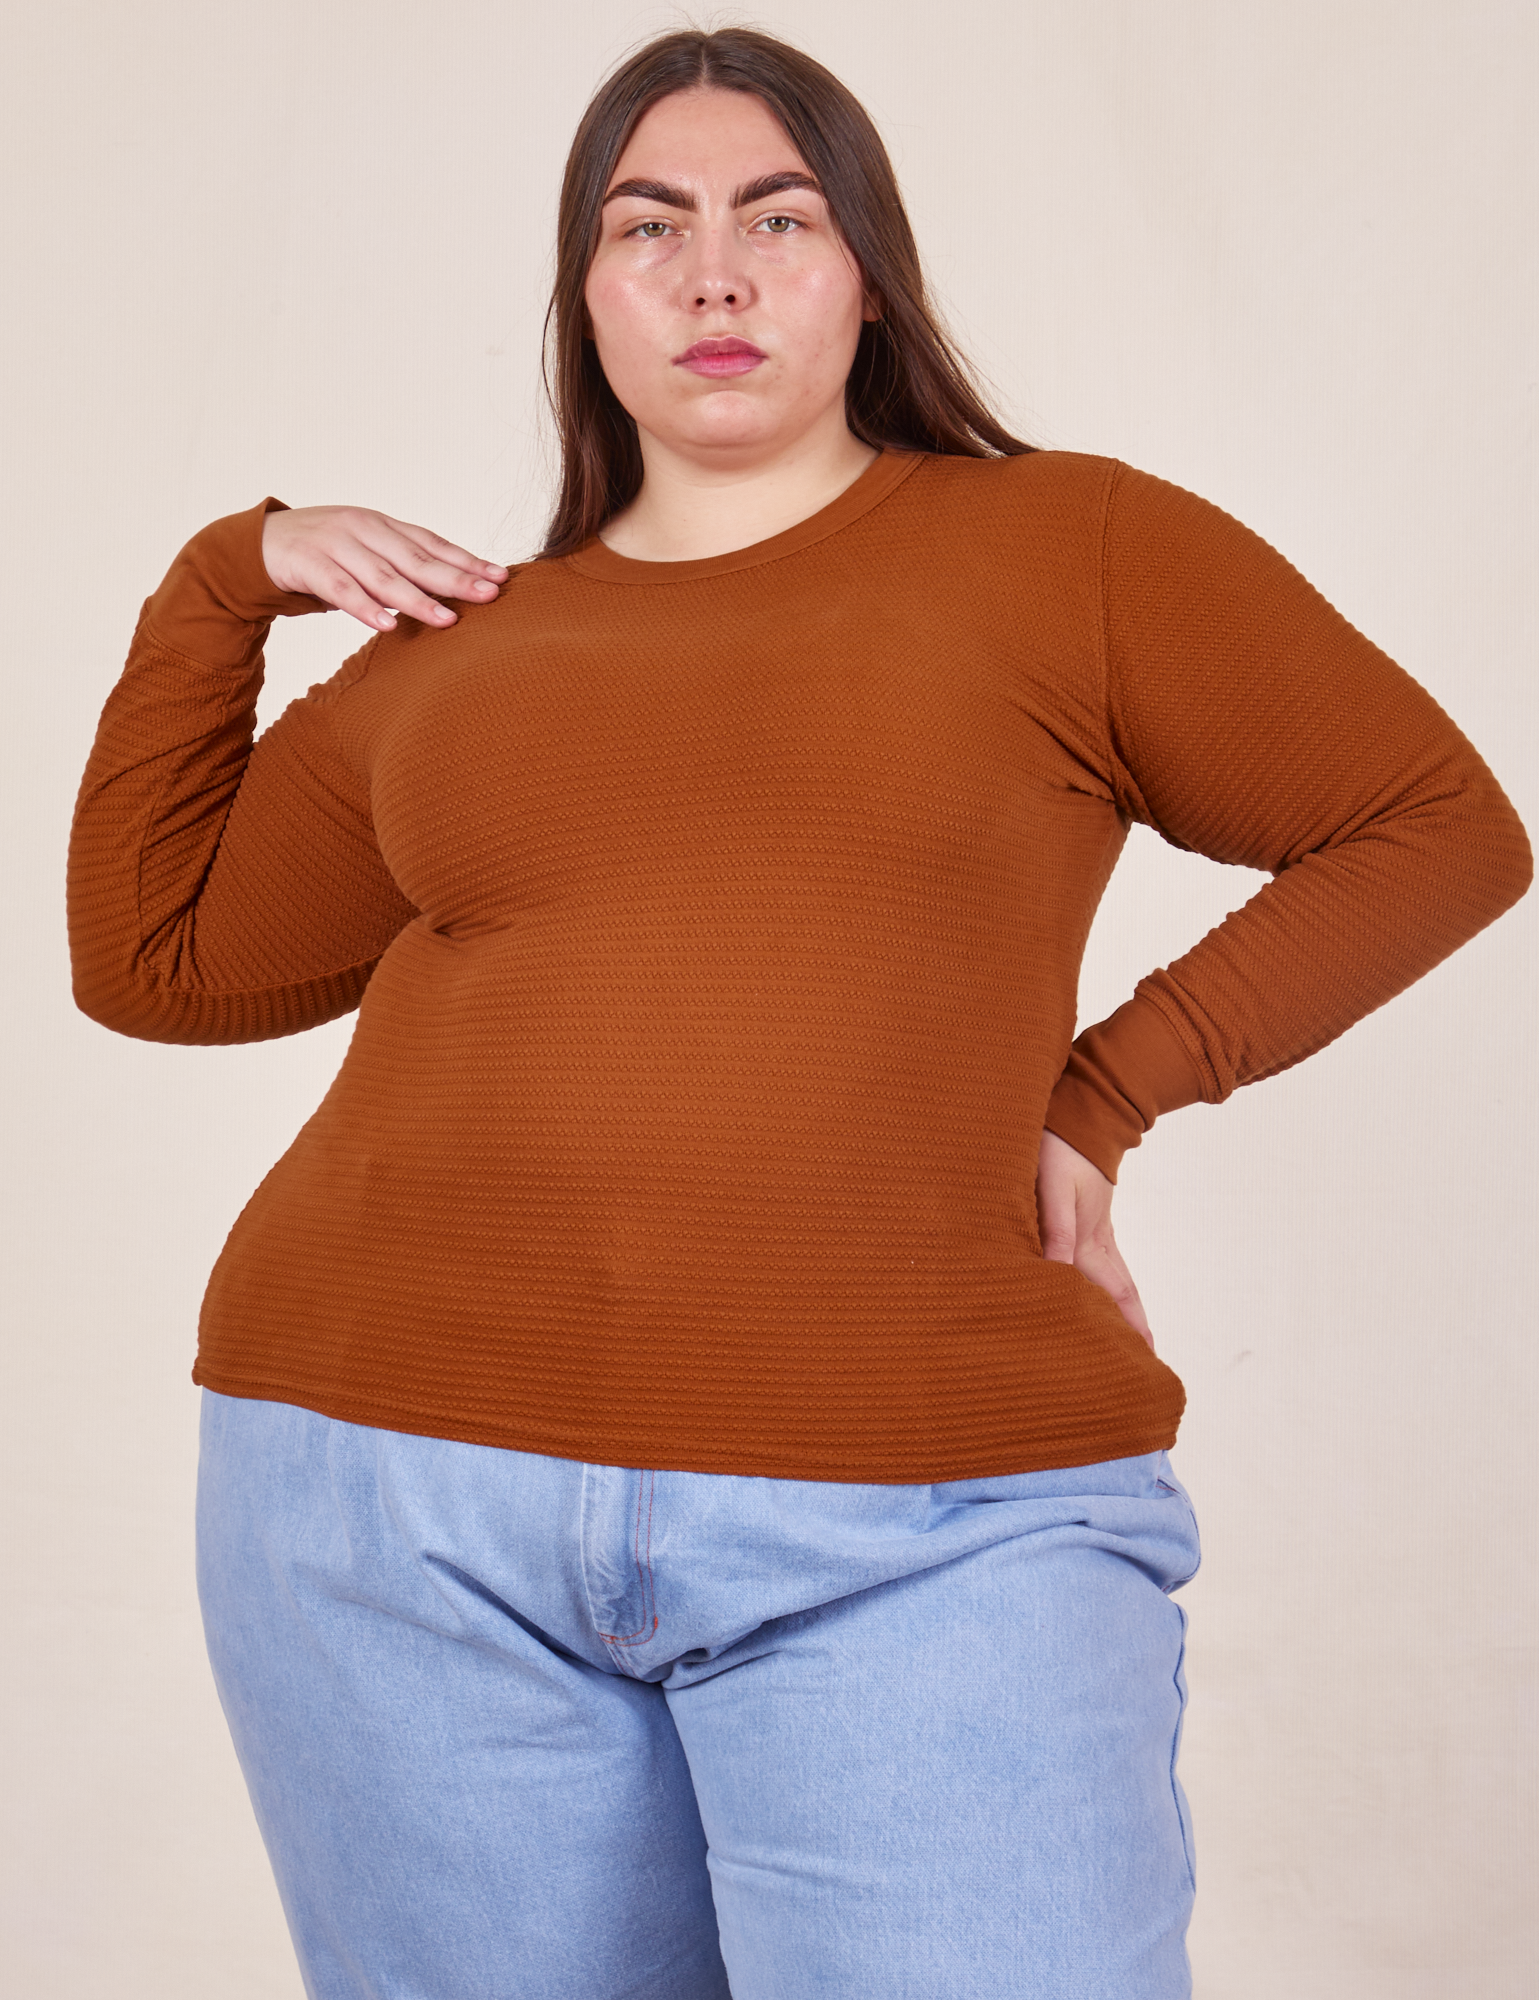 Marielena is wearing 2XL Honeycomb Thermal in Burnt Terracotta